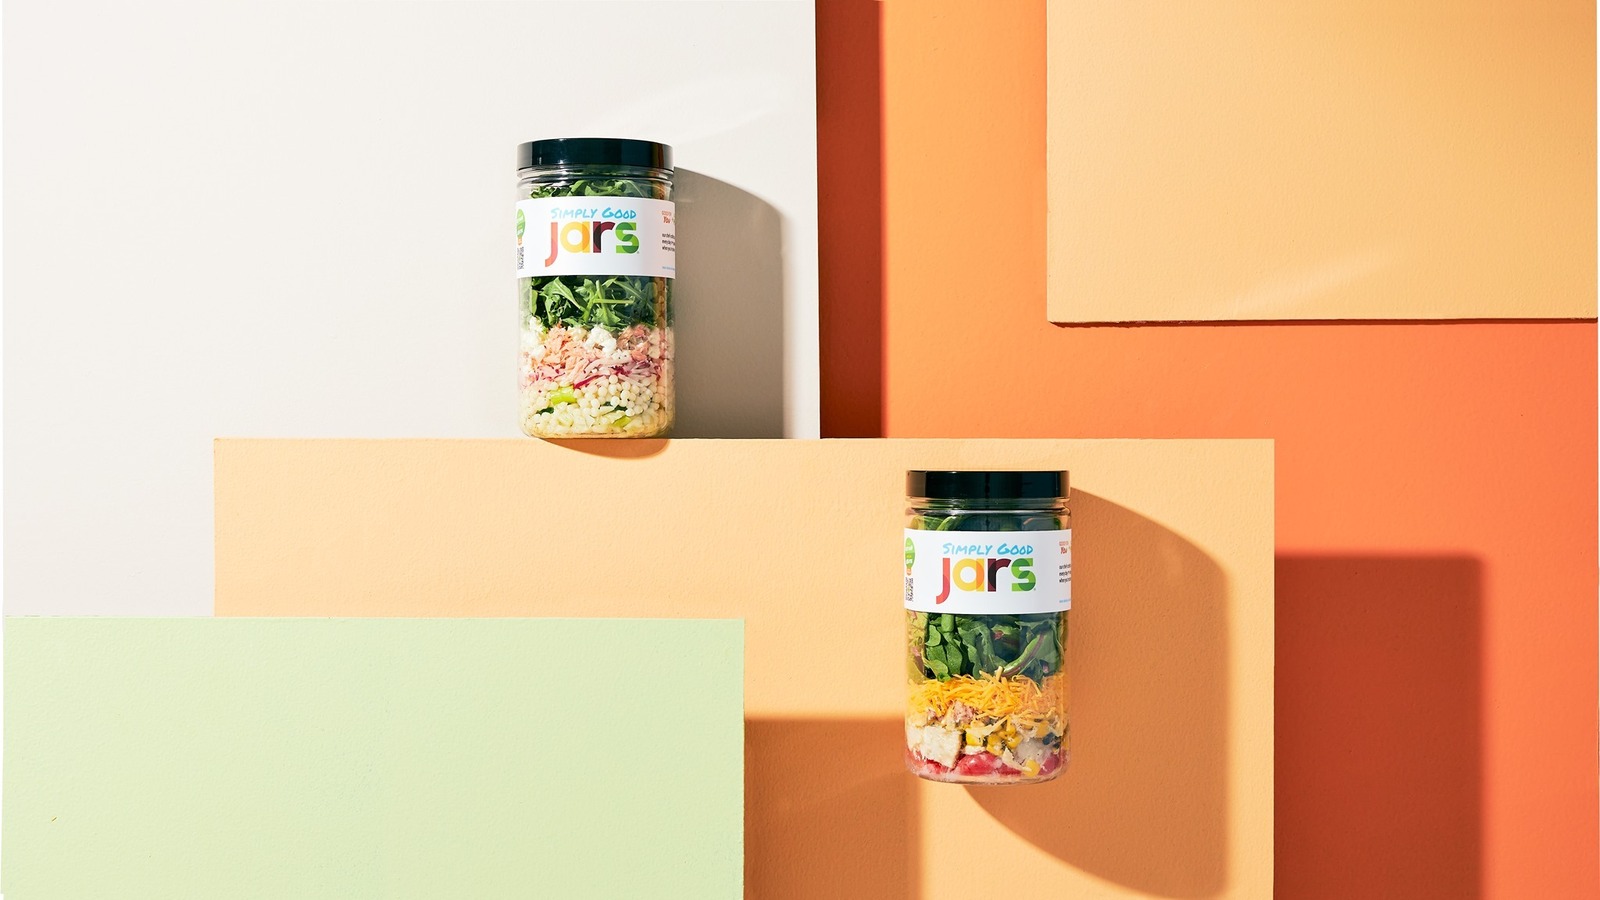 From TV to table: Shark Tank inspired salad jars for the crafty college  student - The Cavalier Daily - University of Virginia's Student Newspaper